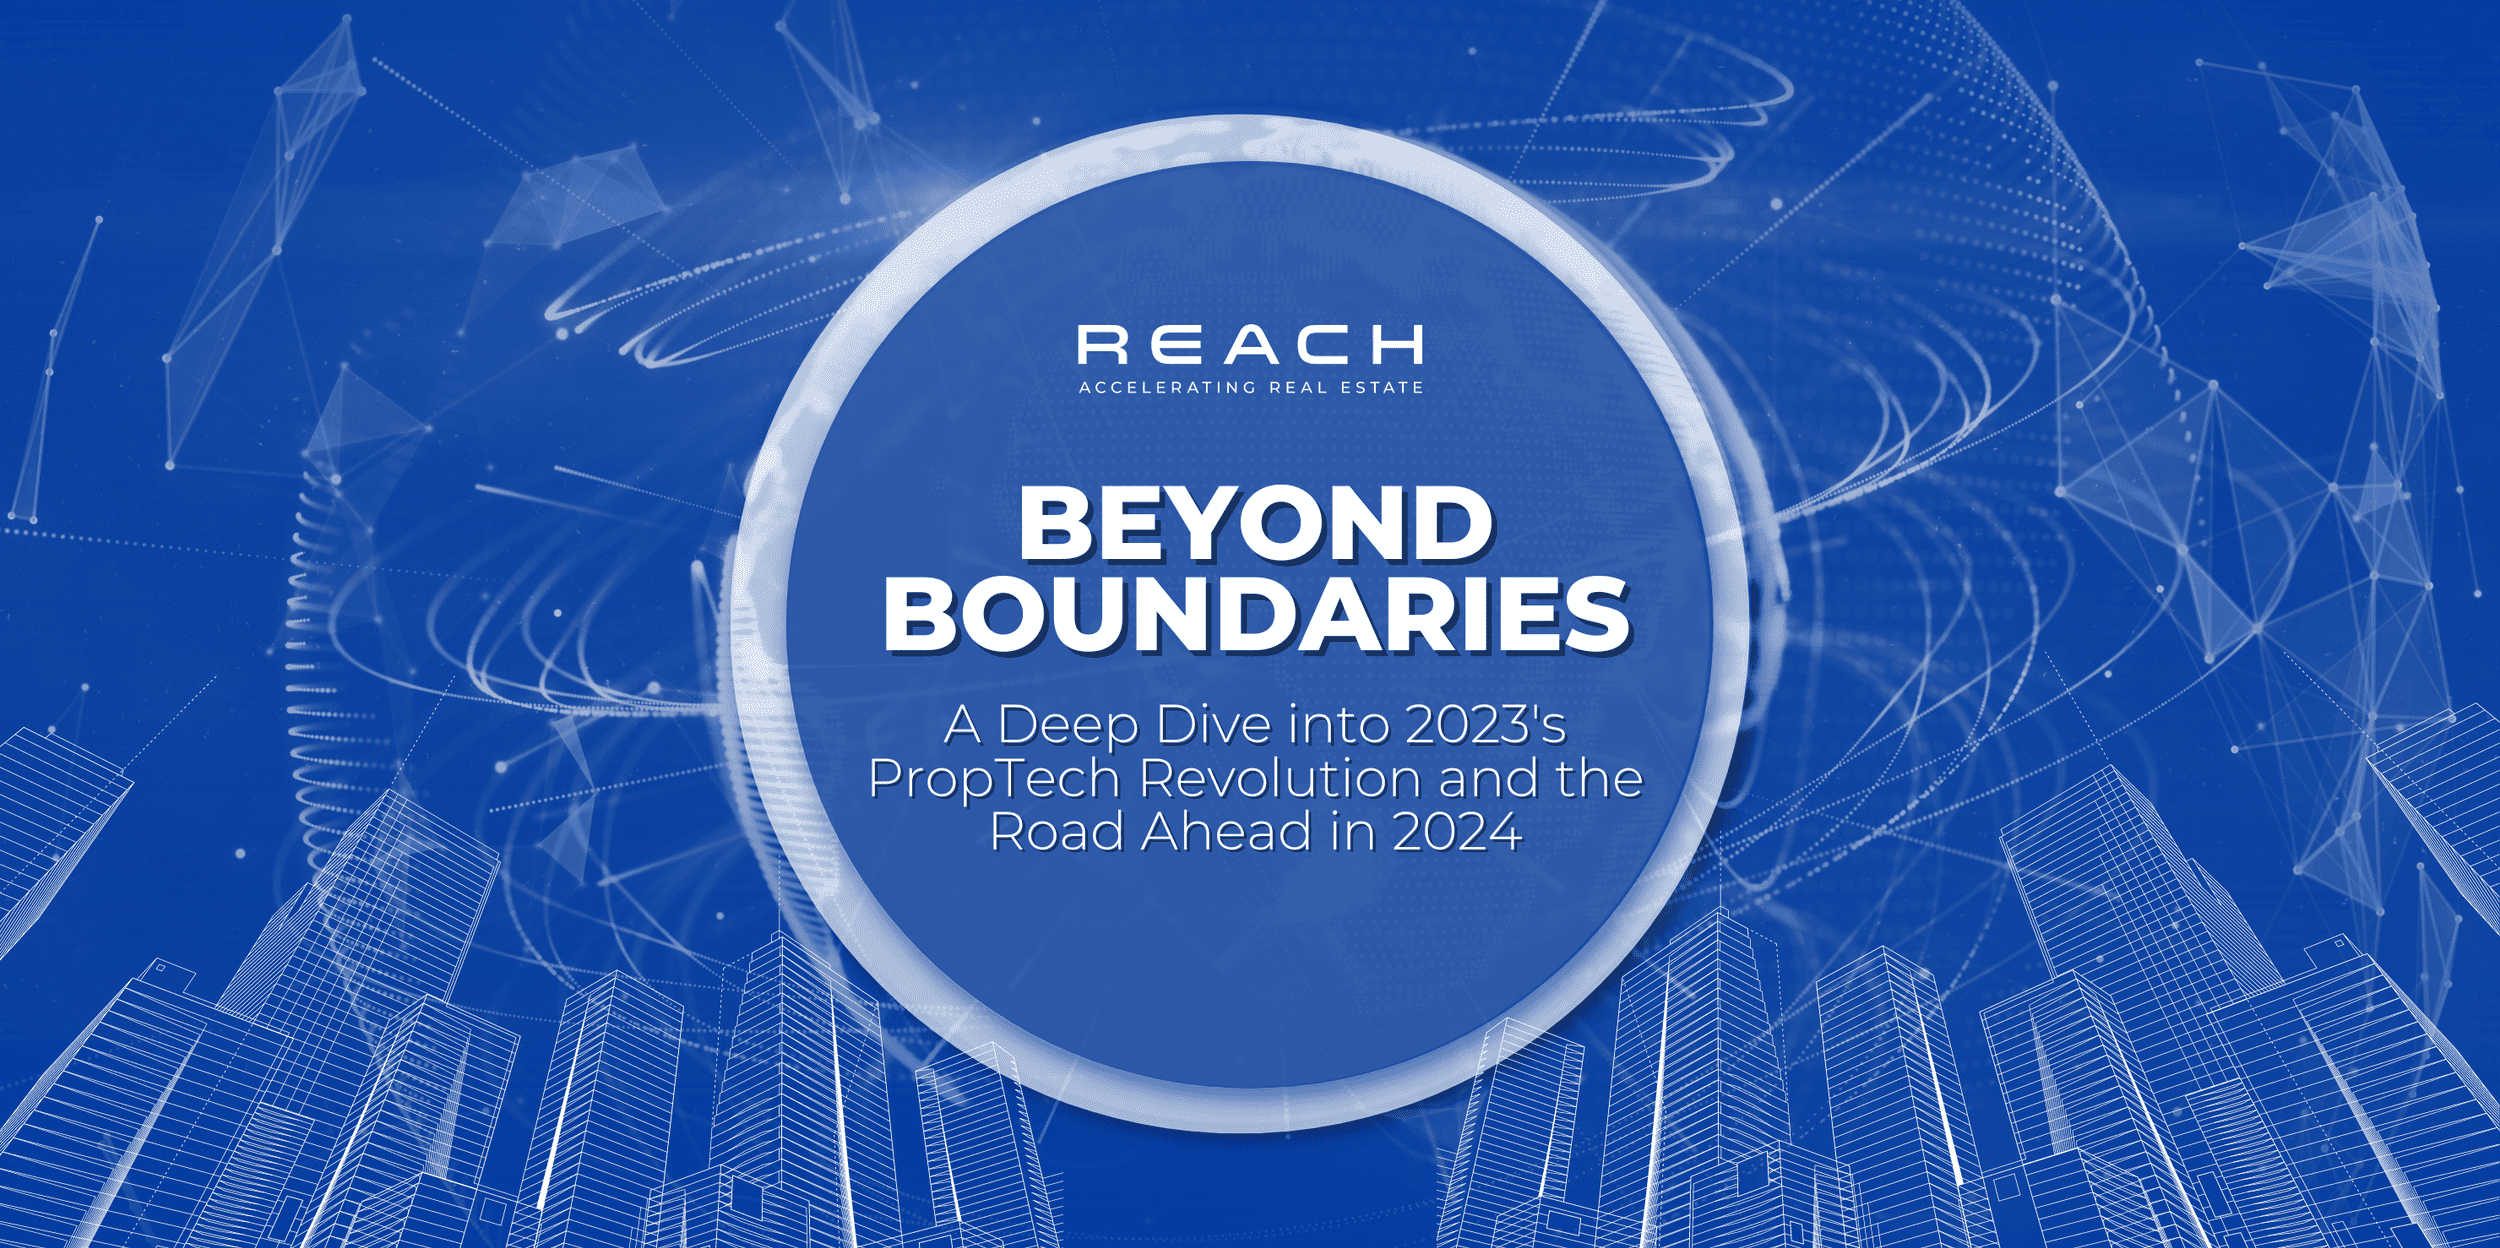 Beyond Boundaries: A Deep Dive into 2023’s PropTech Revolution and the Road Ahead in 2024